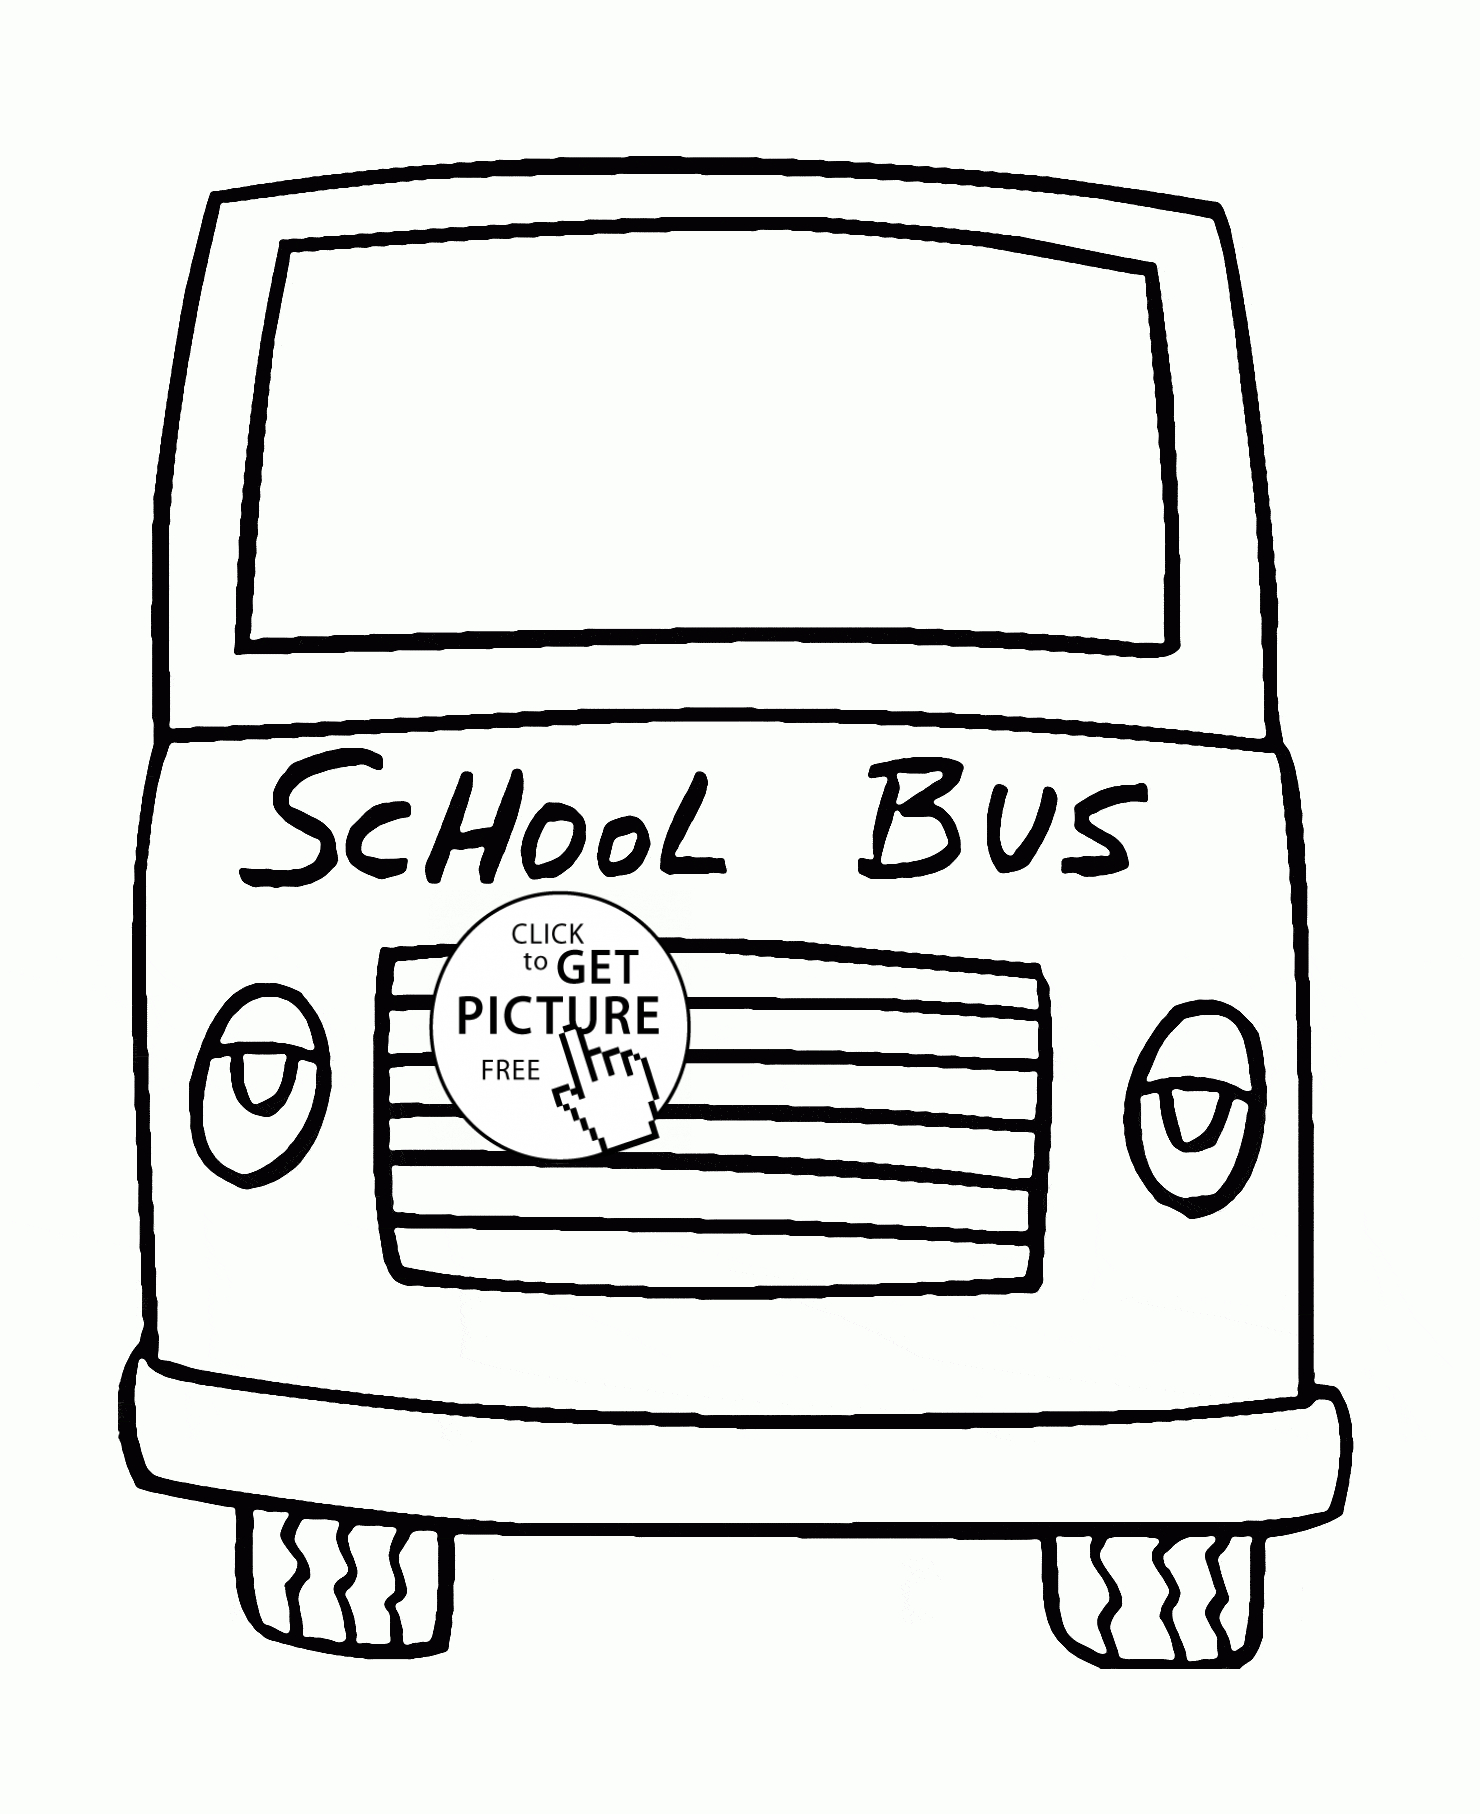 School Bus Coloring Page School Bus Front Side Coloring Page For Toddlers Transportation